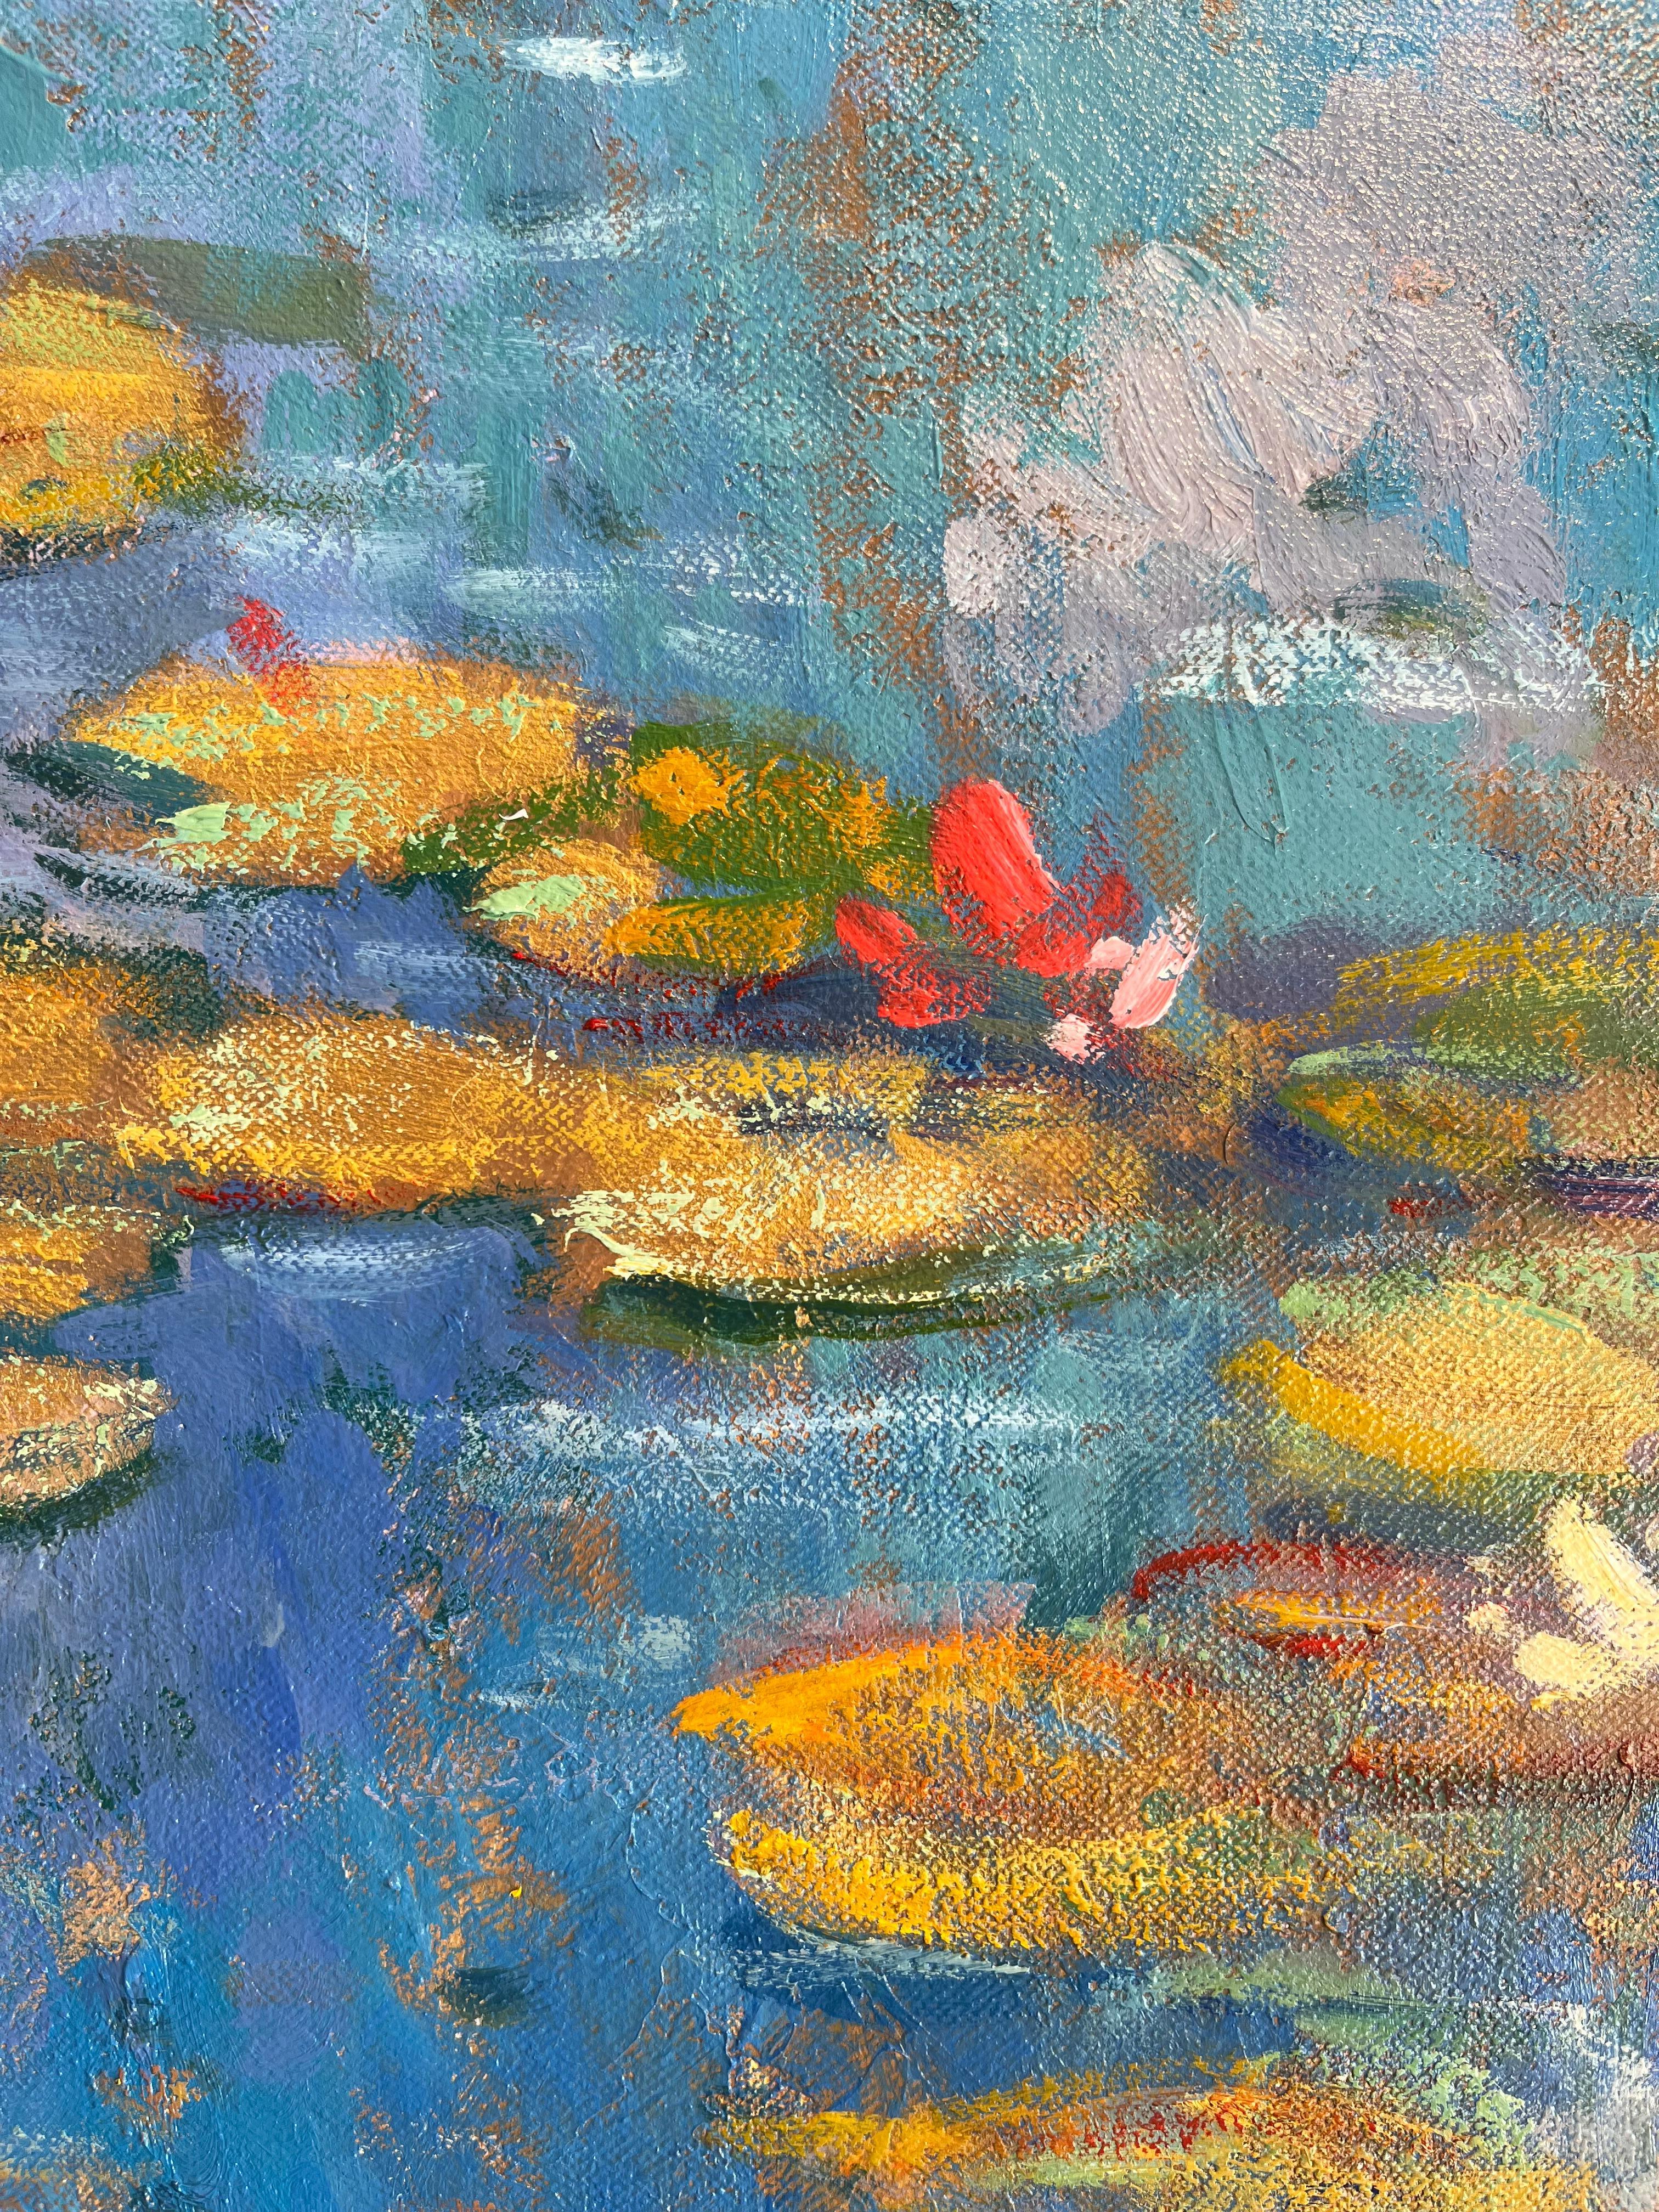 Diptych Water Lilies-original impressionist landscape painting-contemporary Art  - Impressionist Painting by Juan del Pozo